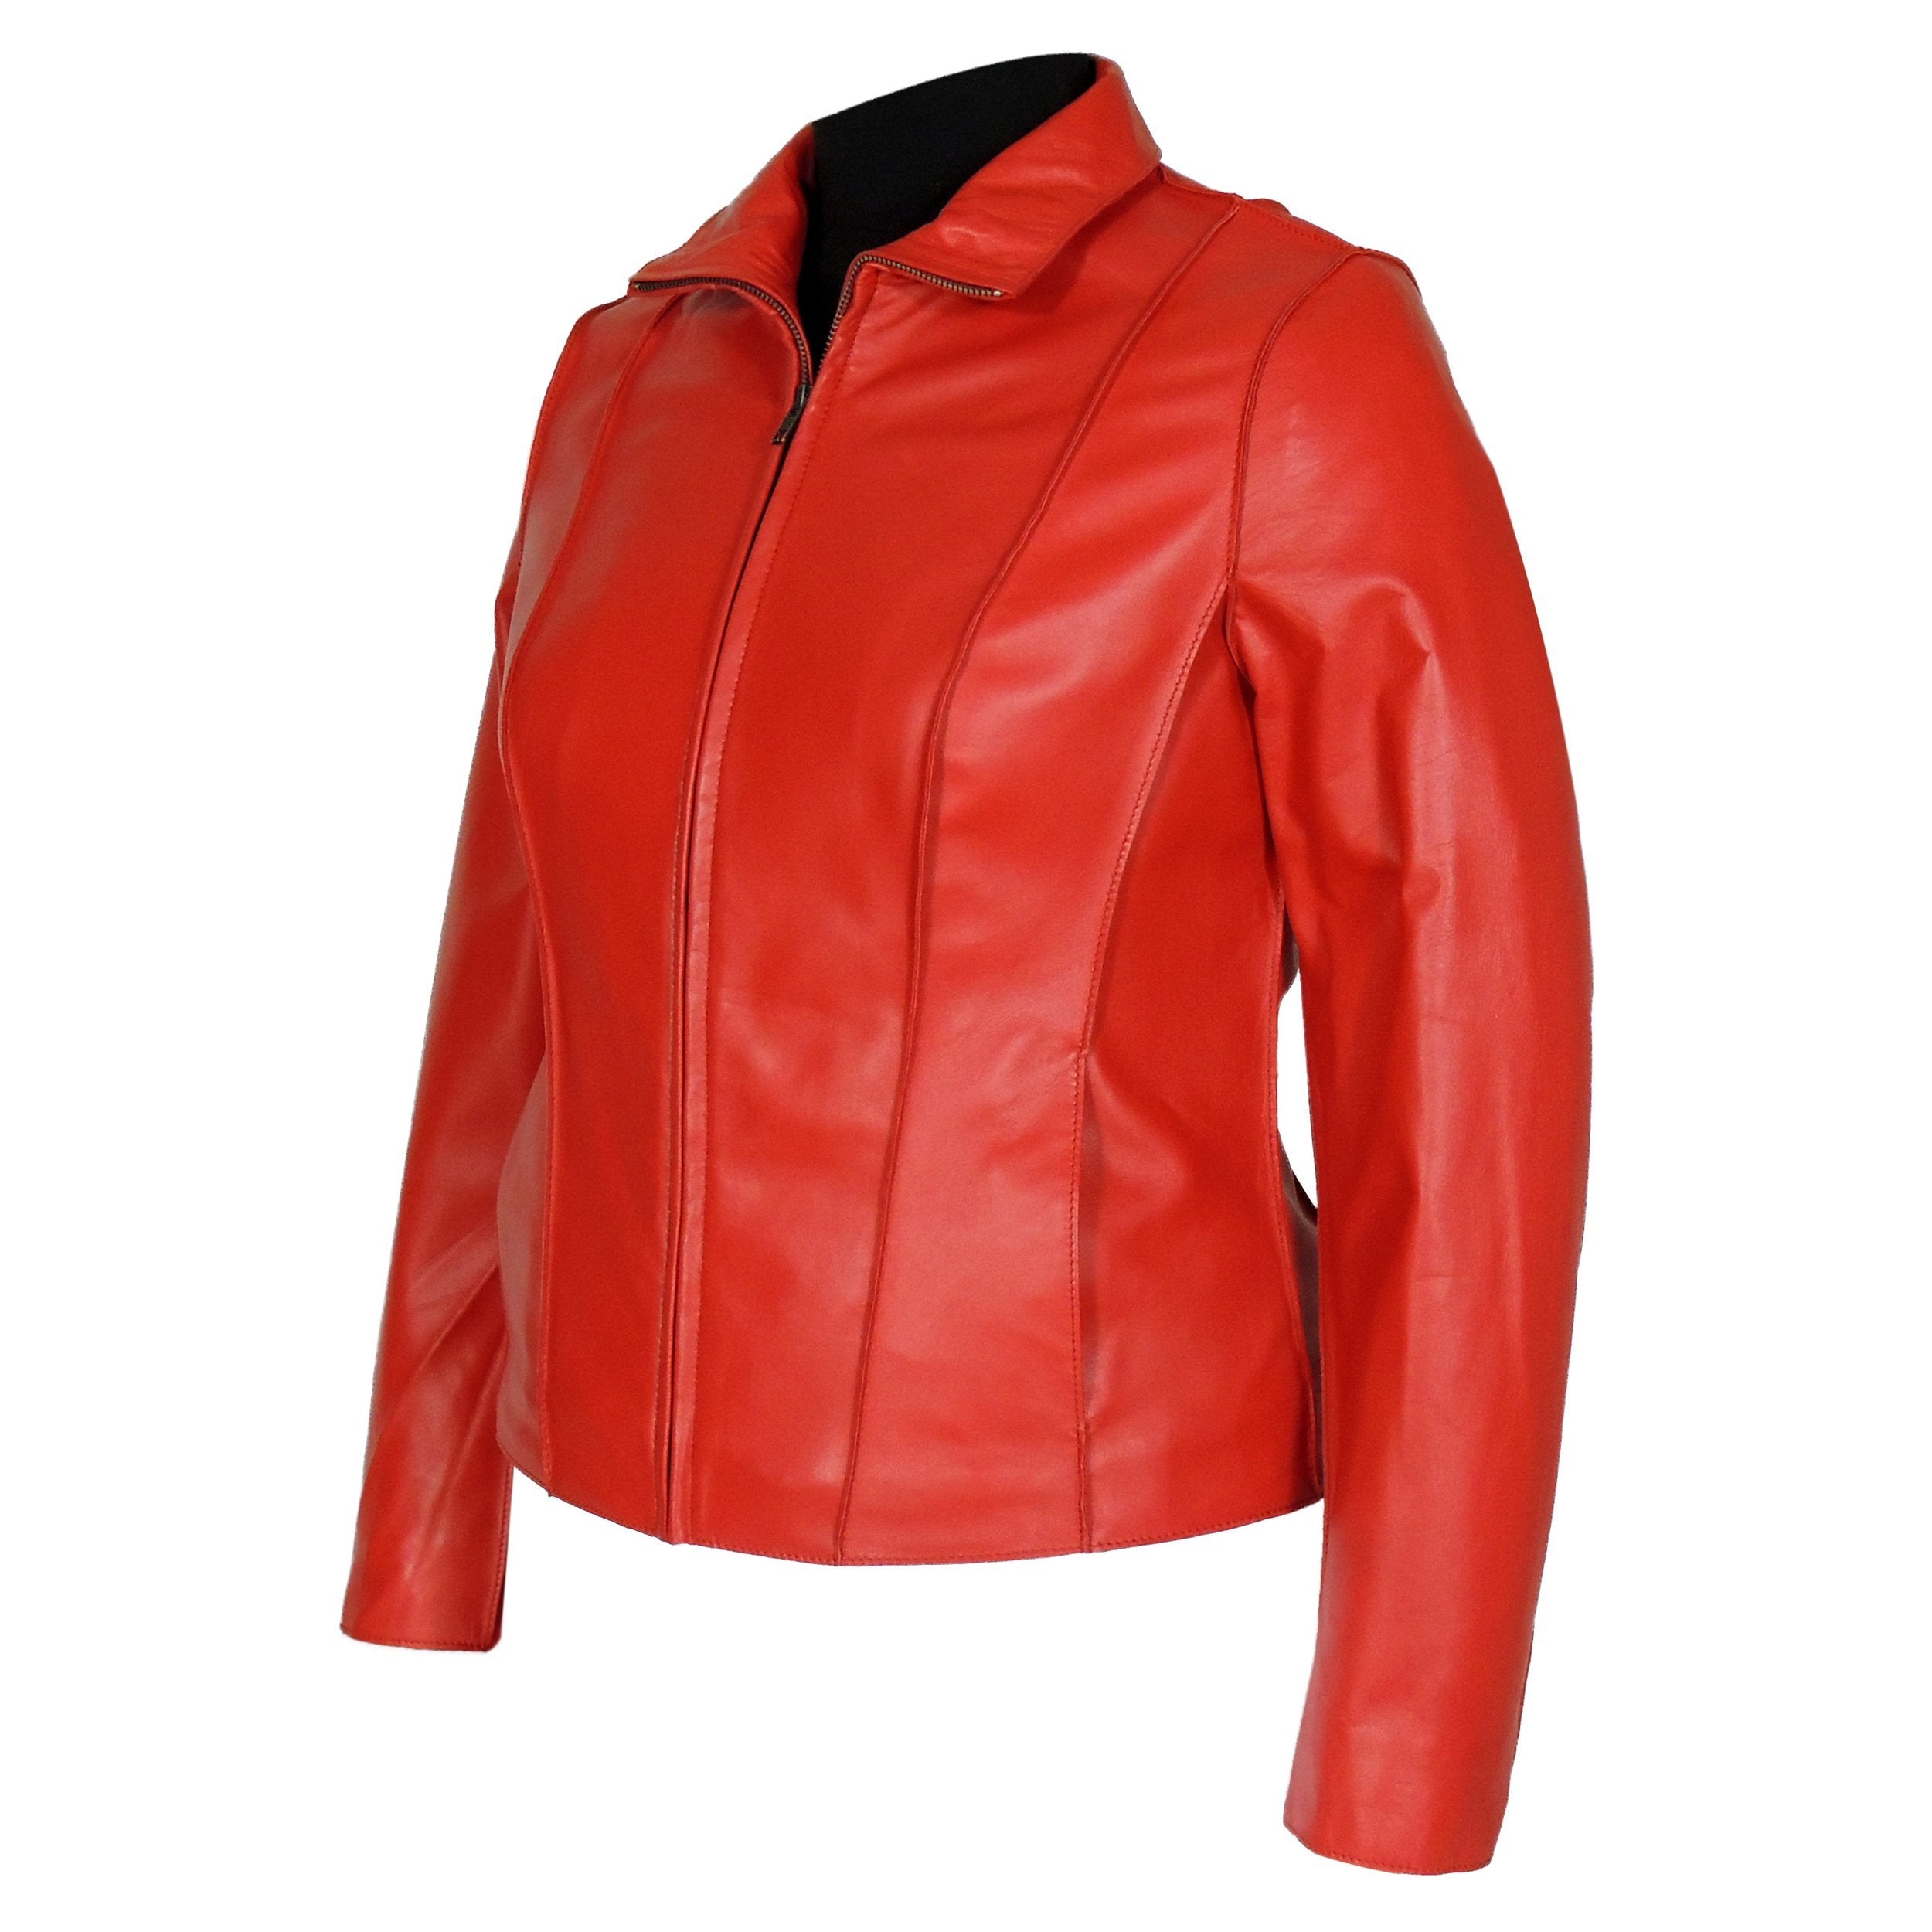 Picture of a Women's Professional Stunner Sheepskin Leather Jacket front side view red